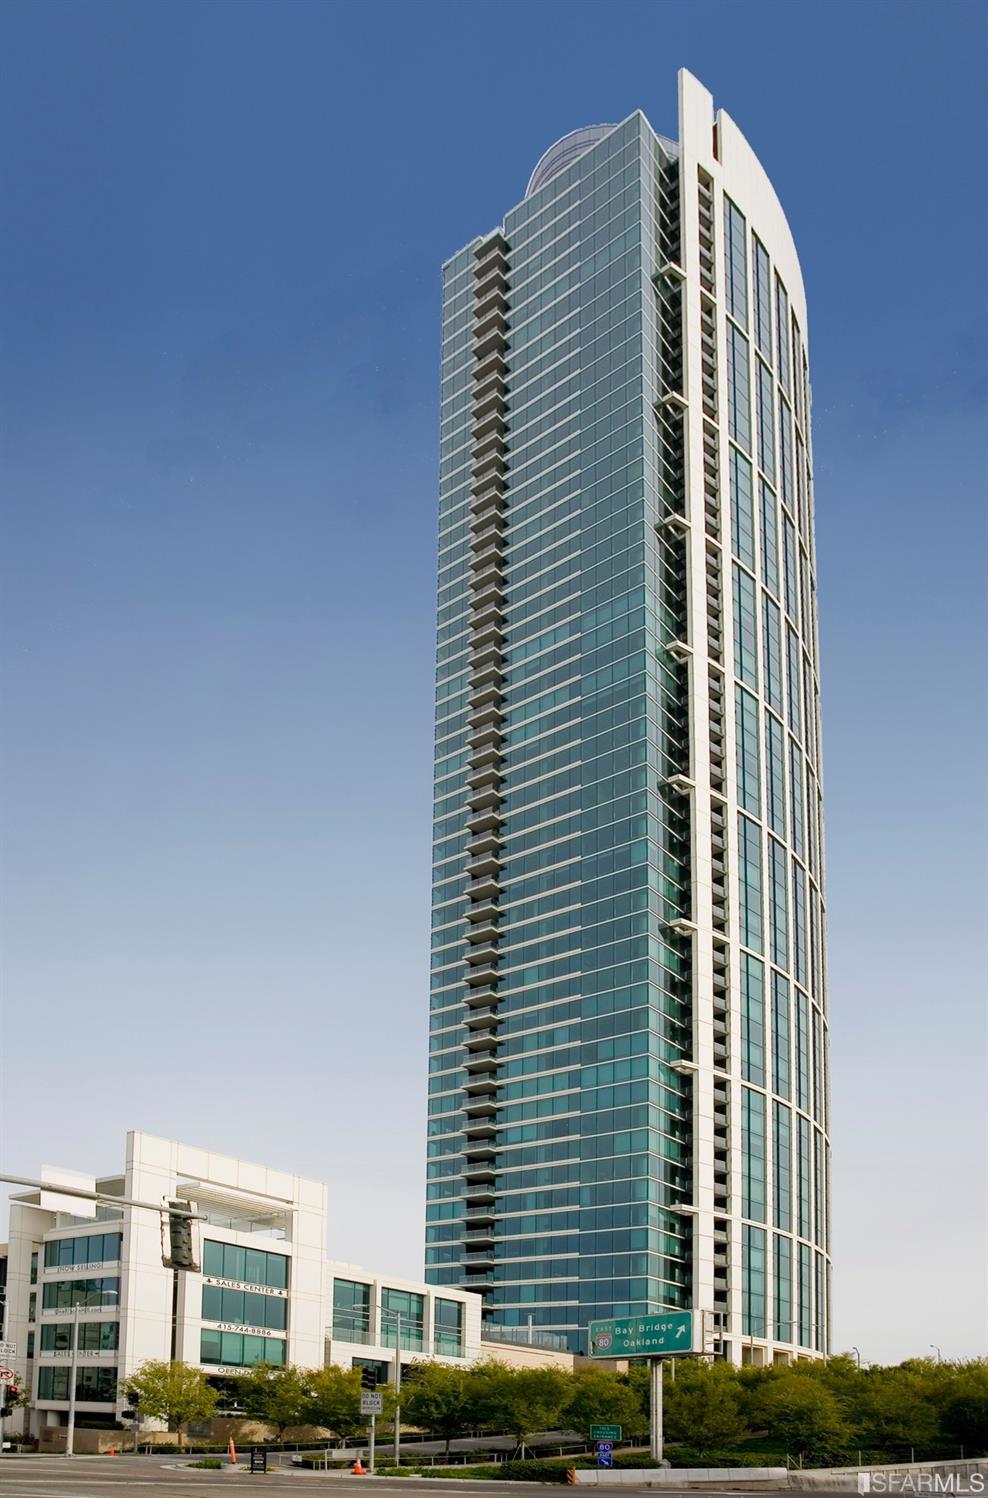 One Rincon Hill. 60 Story tower built in 2008